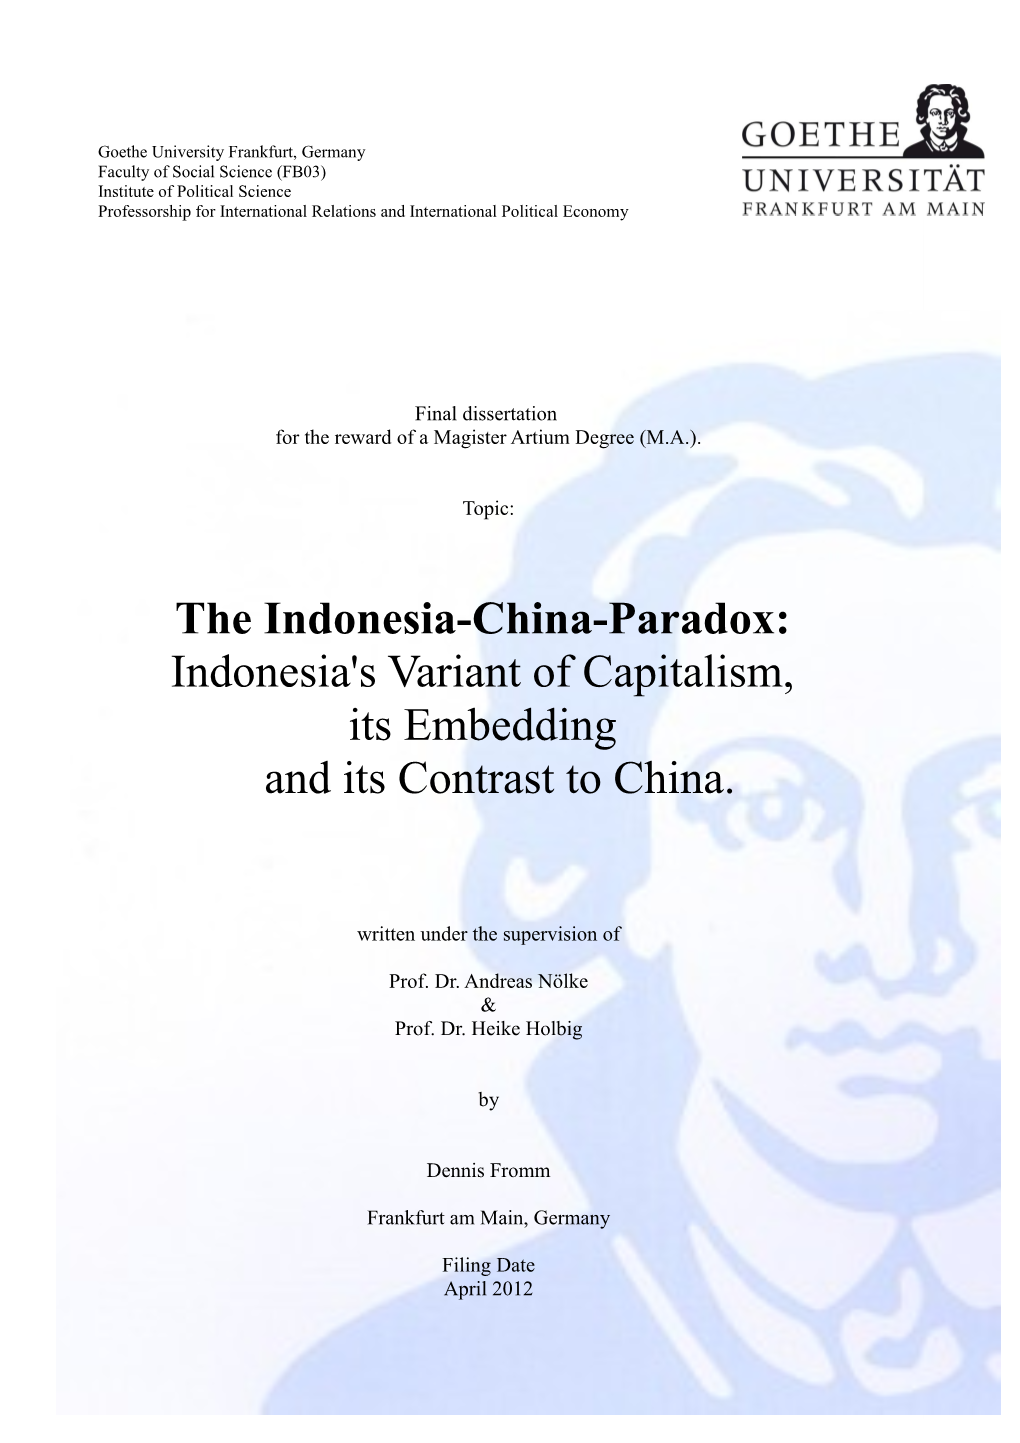 The Indonesia-China-Paradox: Indonesia's Variant of Capitalism, Its Embedding and Its Contrast to China